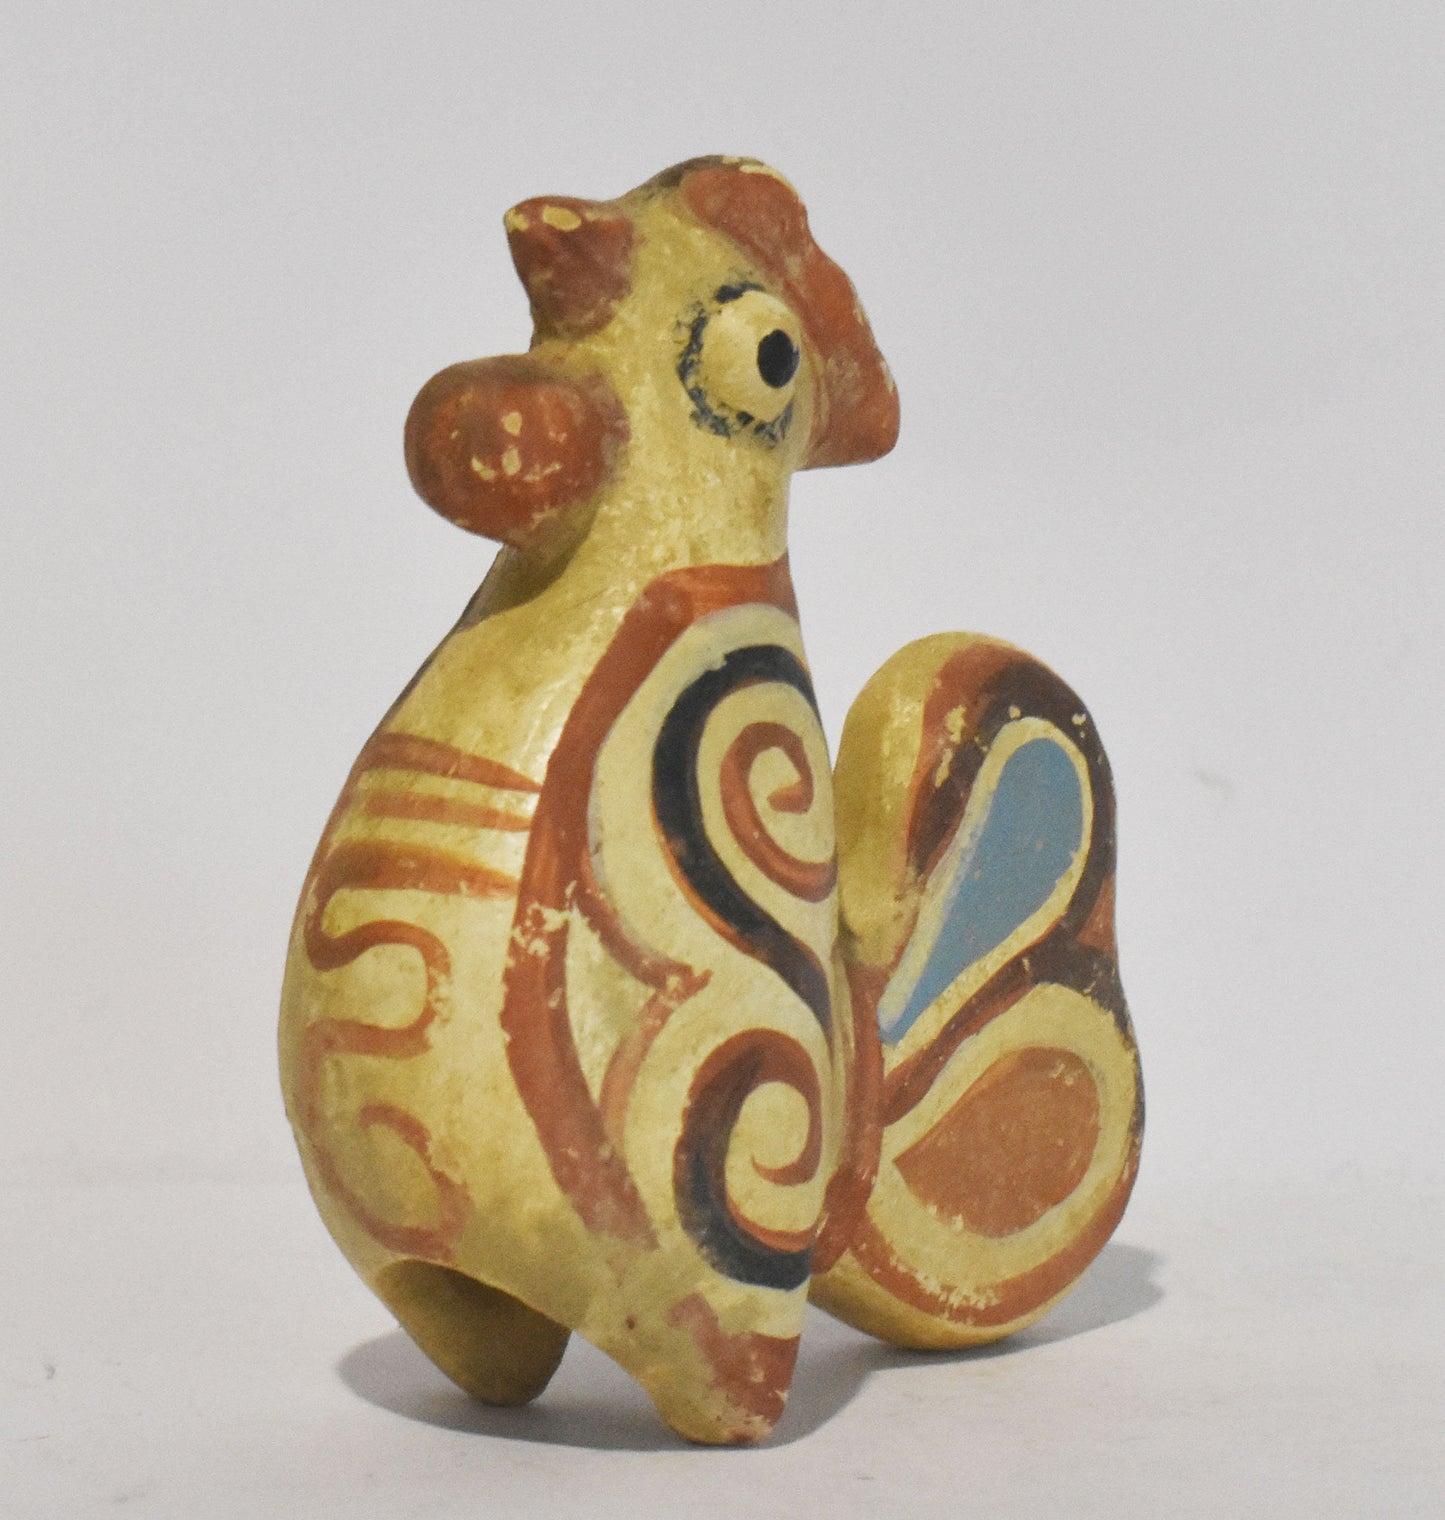 Idol of a Rooster - Attica, Athens - 650 BC - Alectryon's Myth - Miniature - Museum Reproduction - Ceramic Artifact